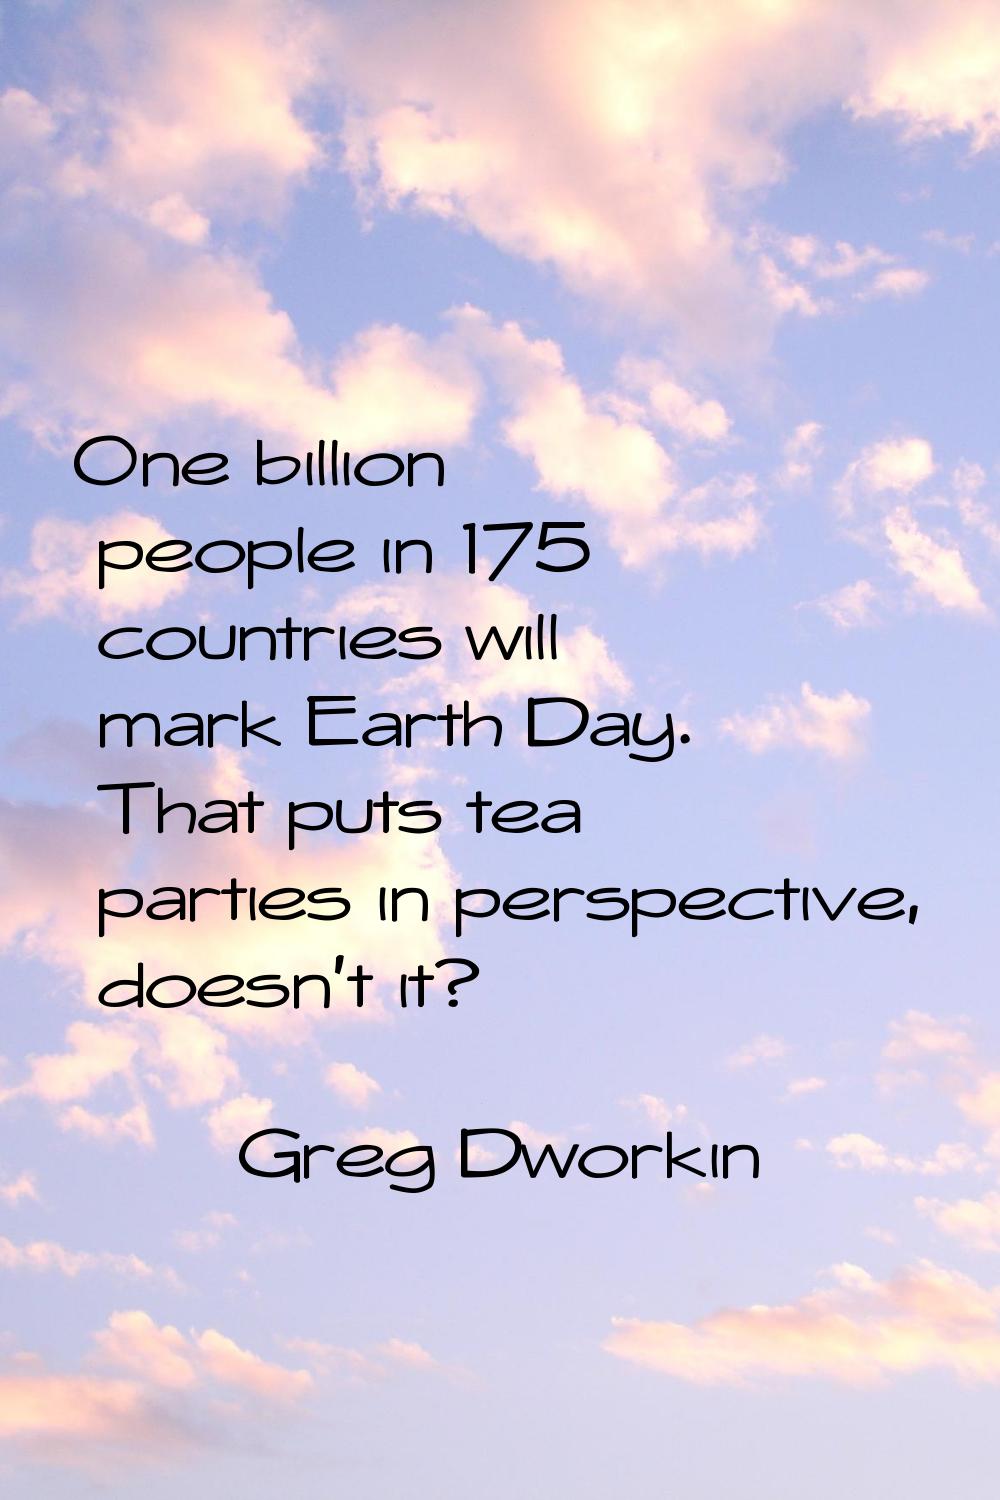 One billion people in 175 countries will mark Earth Day. That puts tea parties in perspective, does